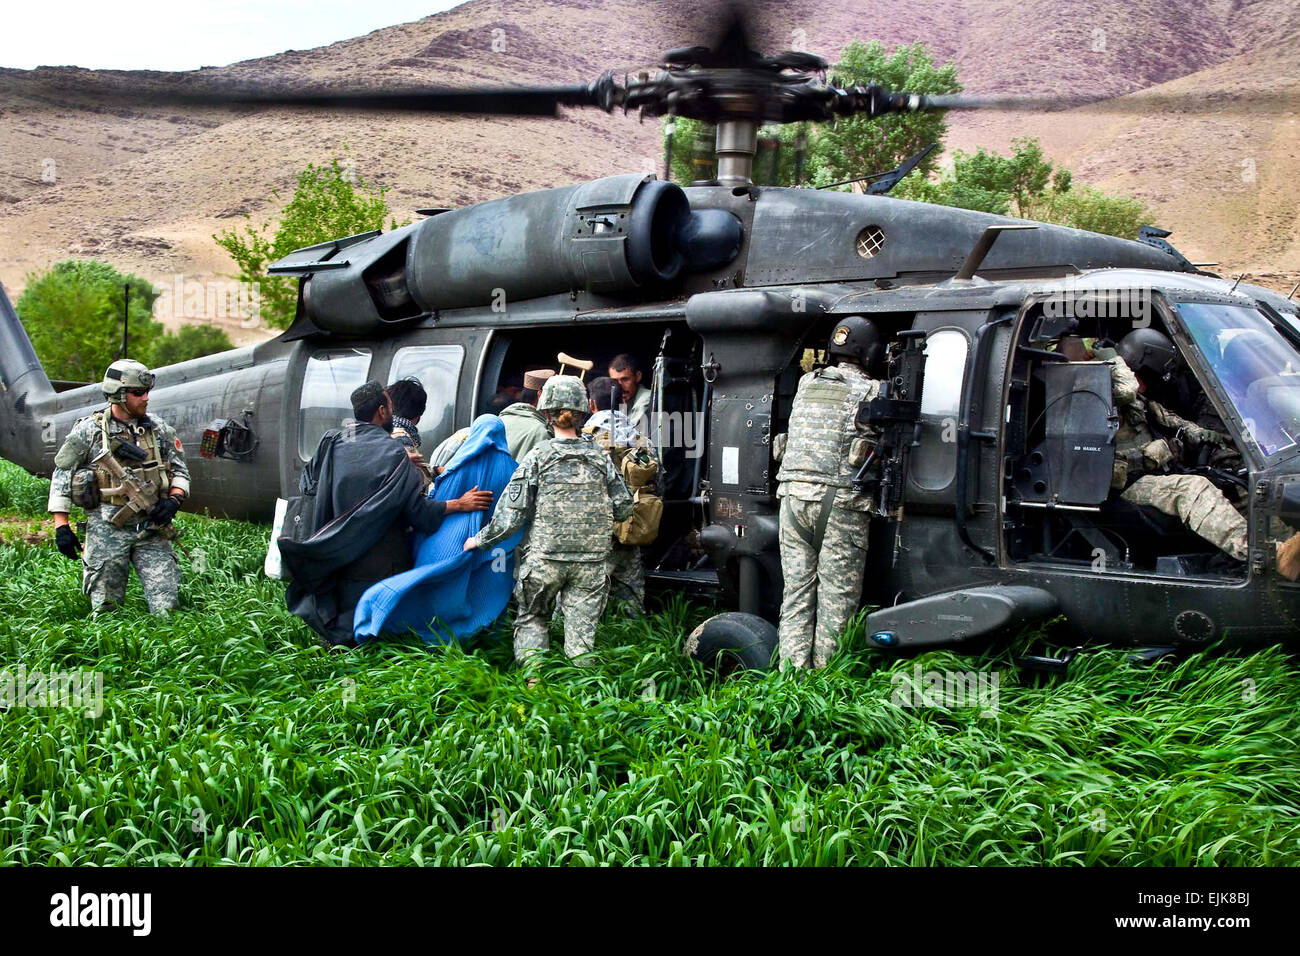 U.S. Army Soldiers help injured Afghan villagers onto a UH-60 Black Hawk helicopter during an operation to transport patients in Uruzgan province, Afghanistan, March 28, 2010.  Spc. Nicholas T. Loyd Stock Photo